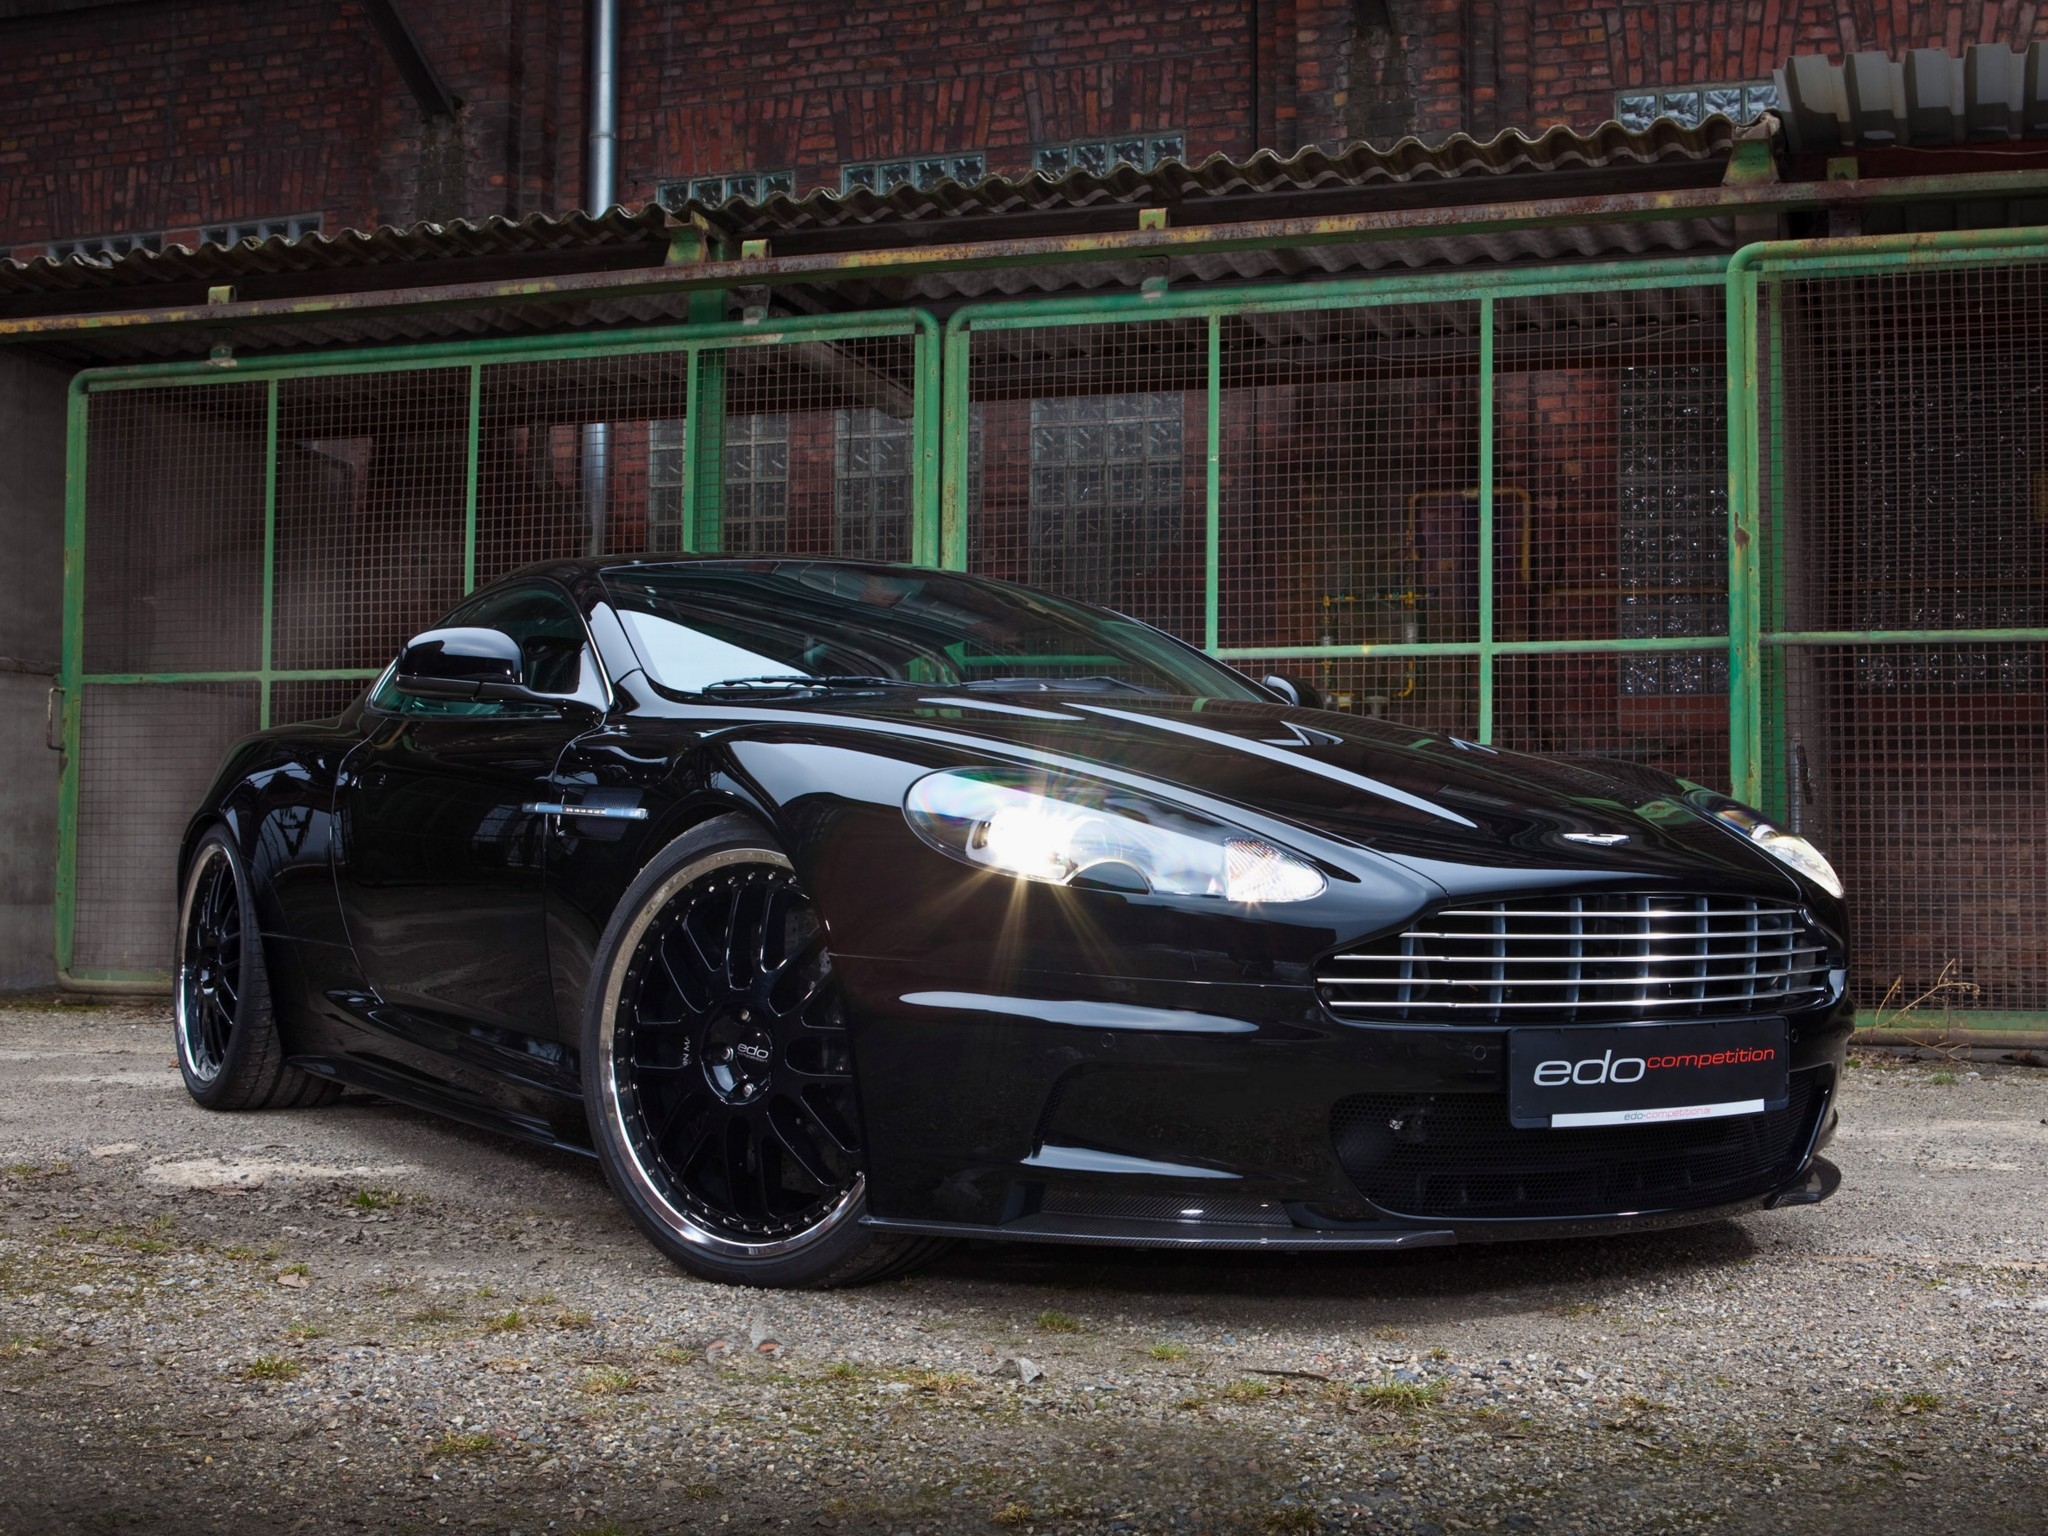 dbs, cars, sports, aston martin, black, building, front view, 2010